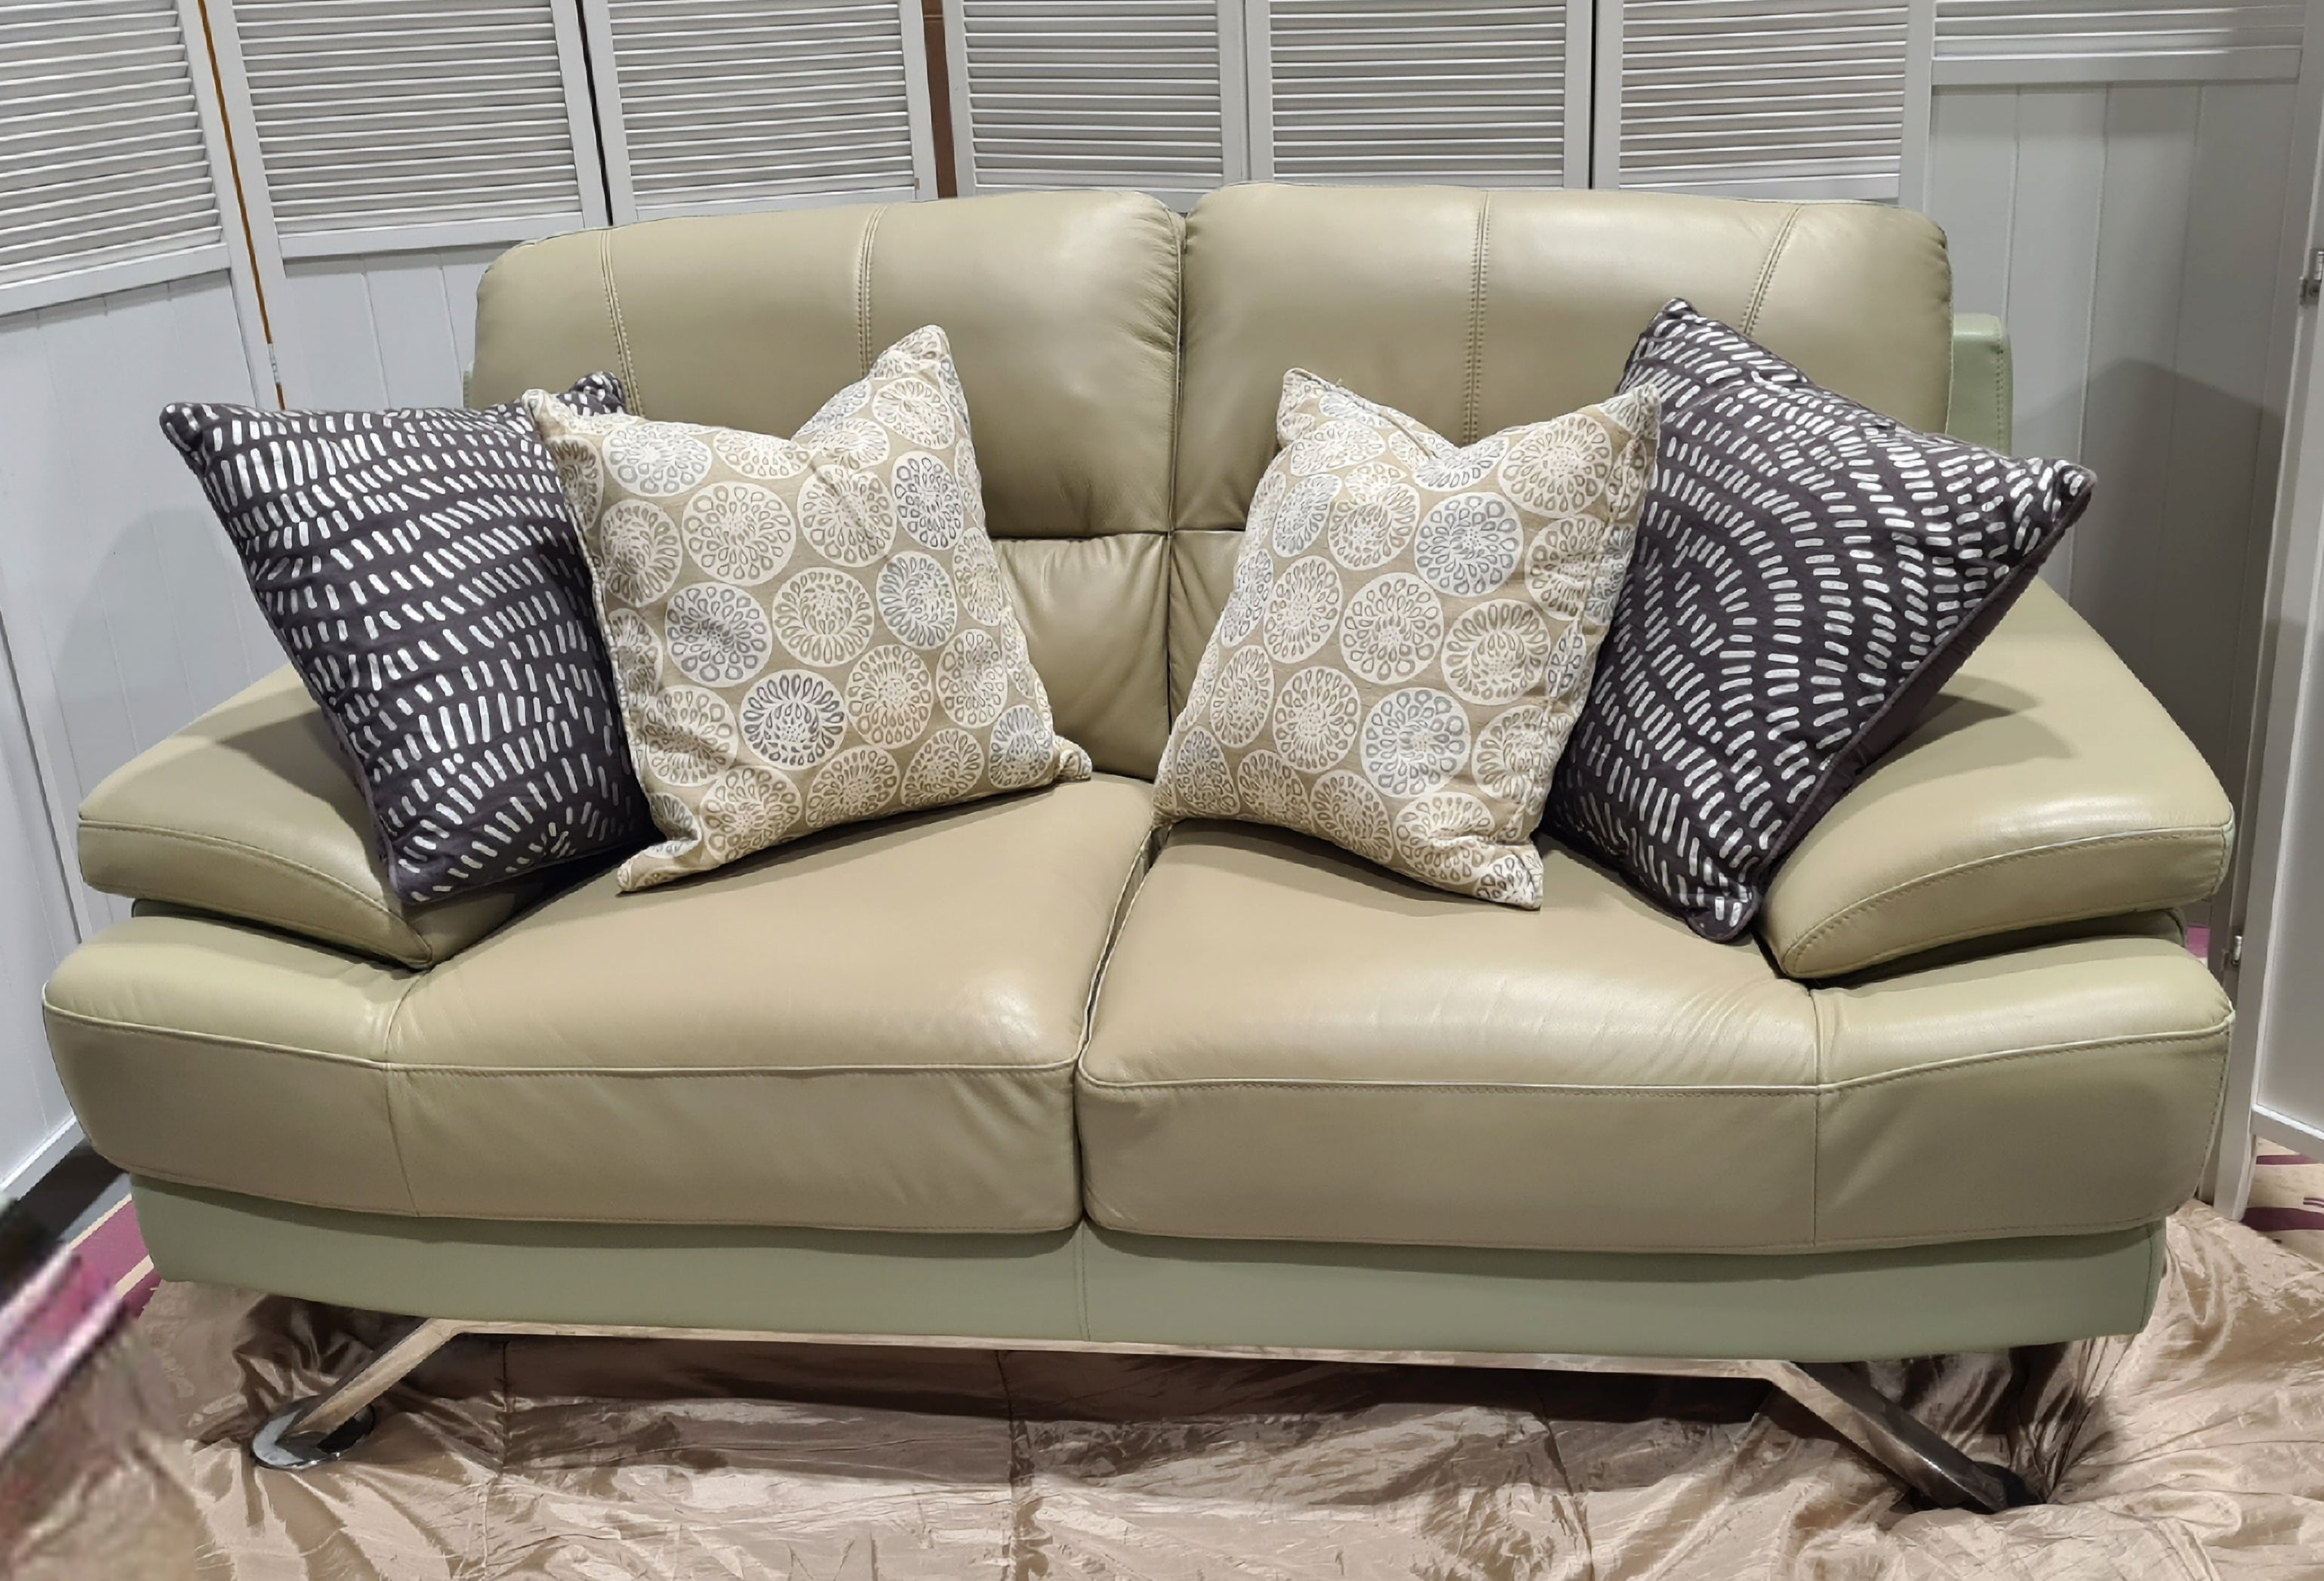 Leather Taupe/Olive green 2 Seater Sofa - $33 / week (6 week hire)